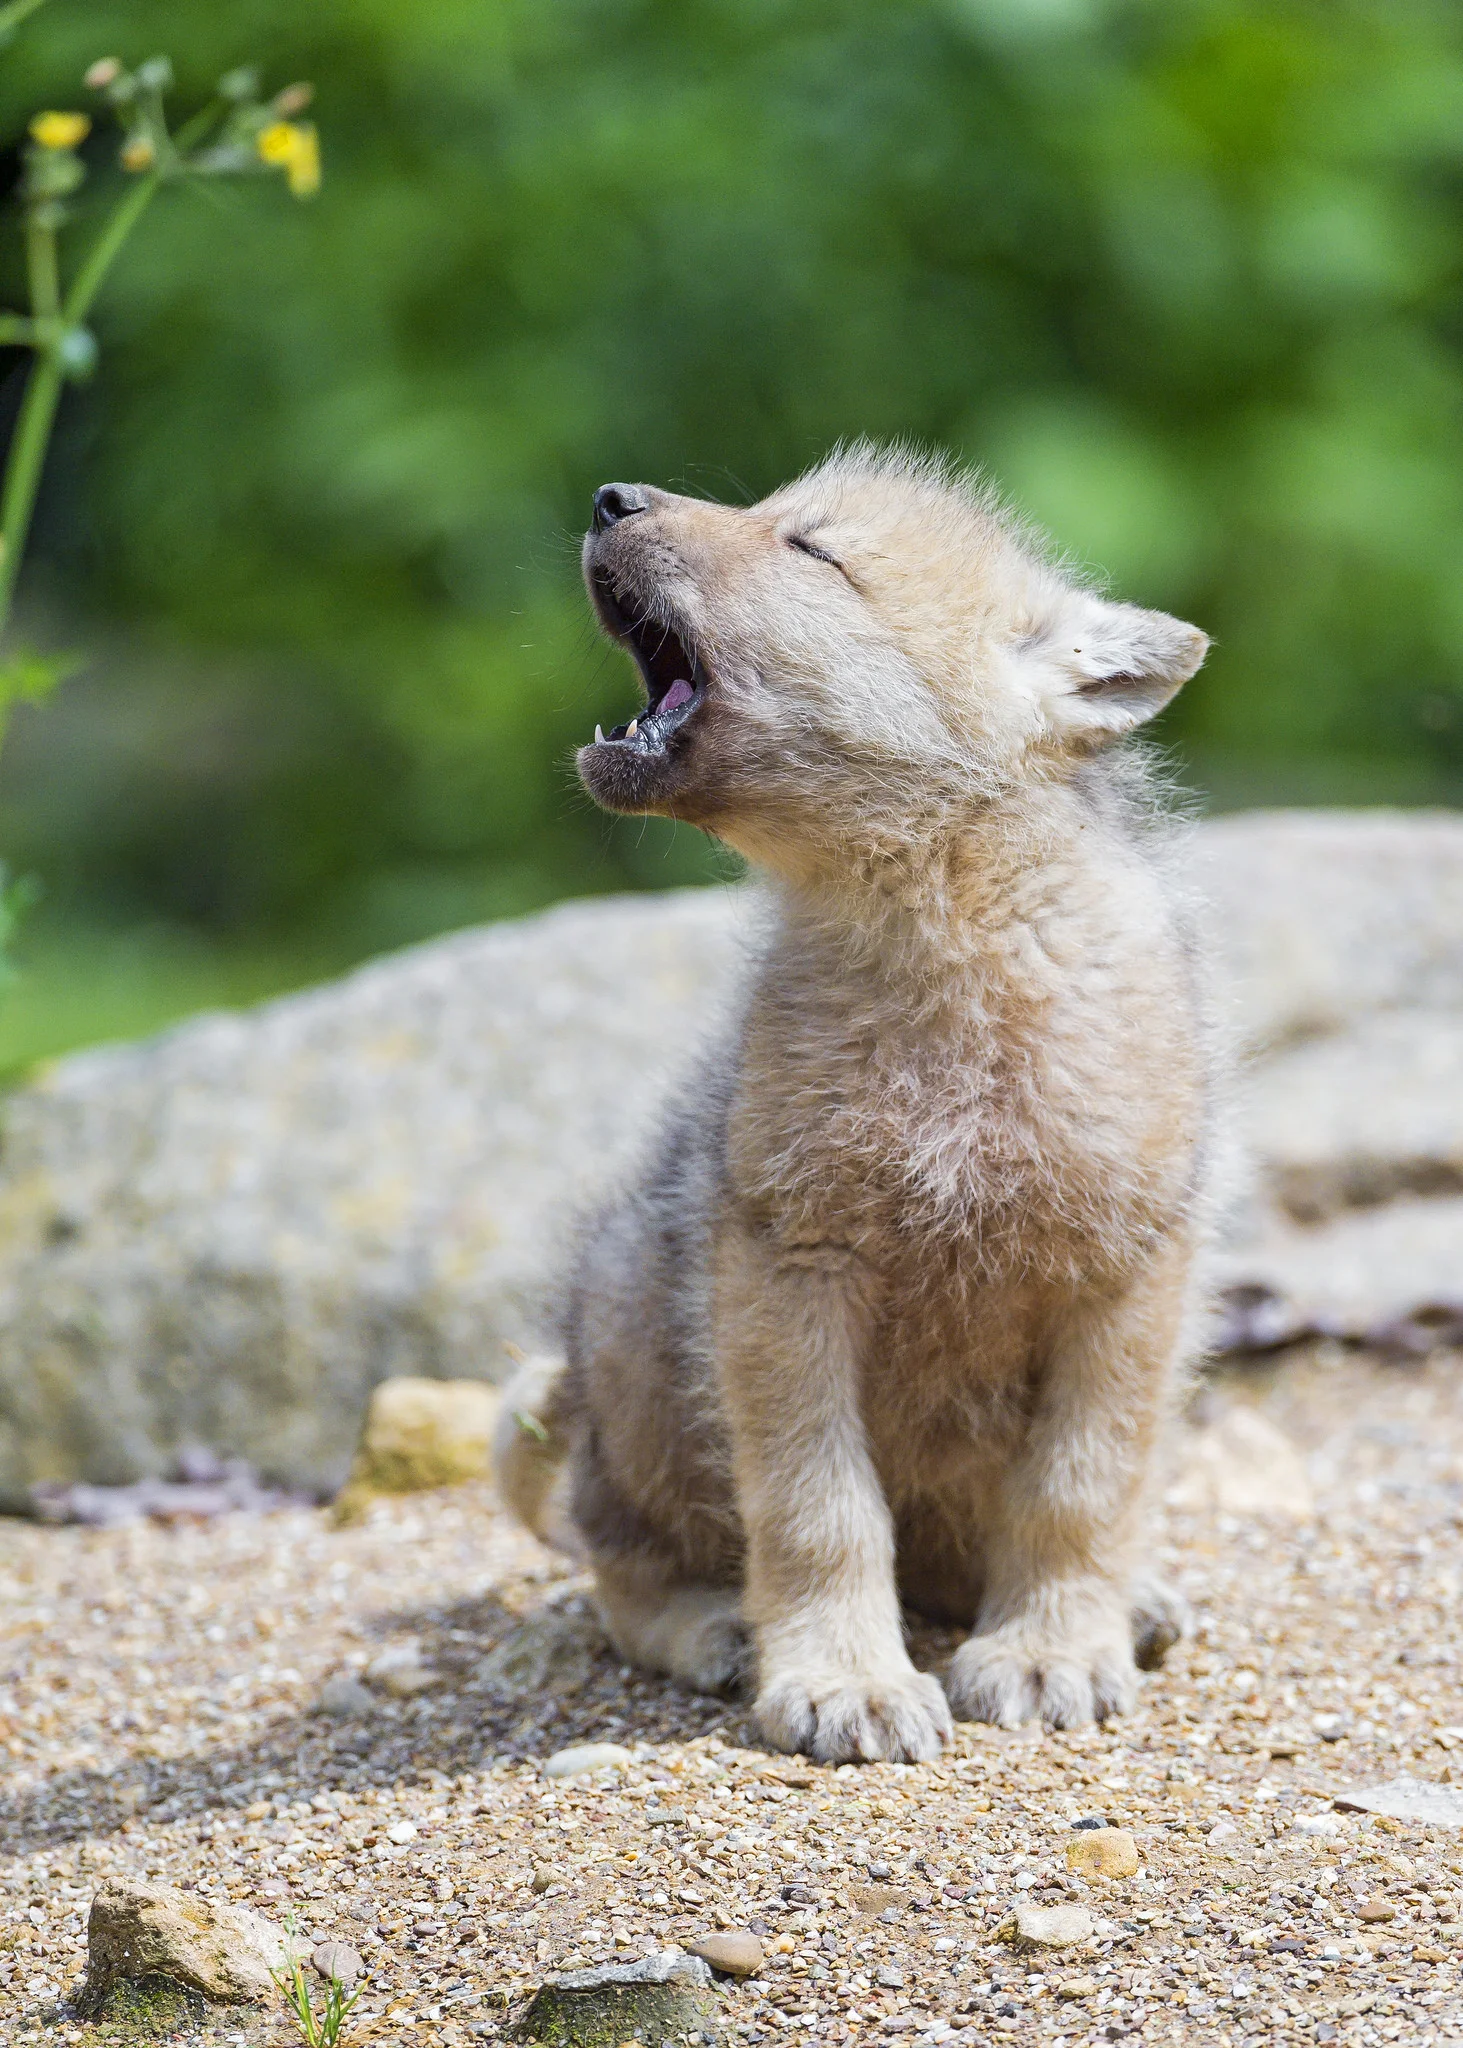 Baby arctic wolf learning to yawn I think that this picture is utterly cute